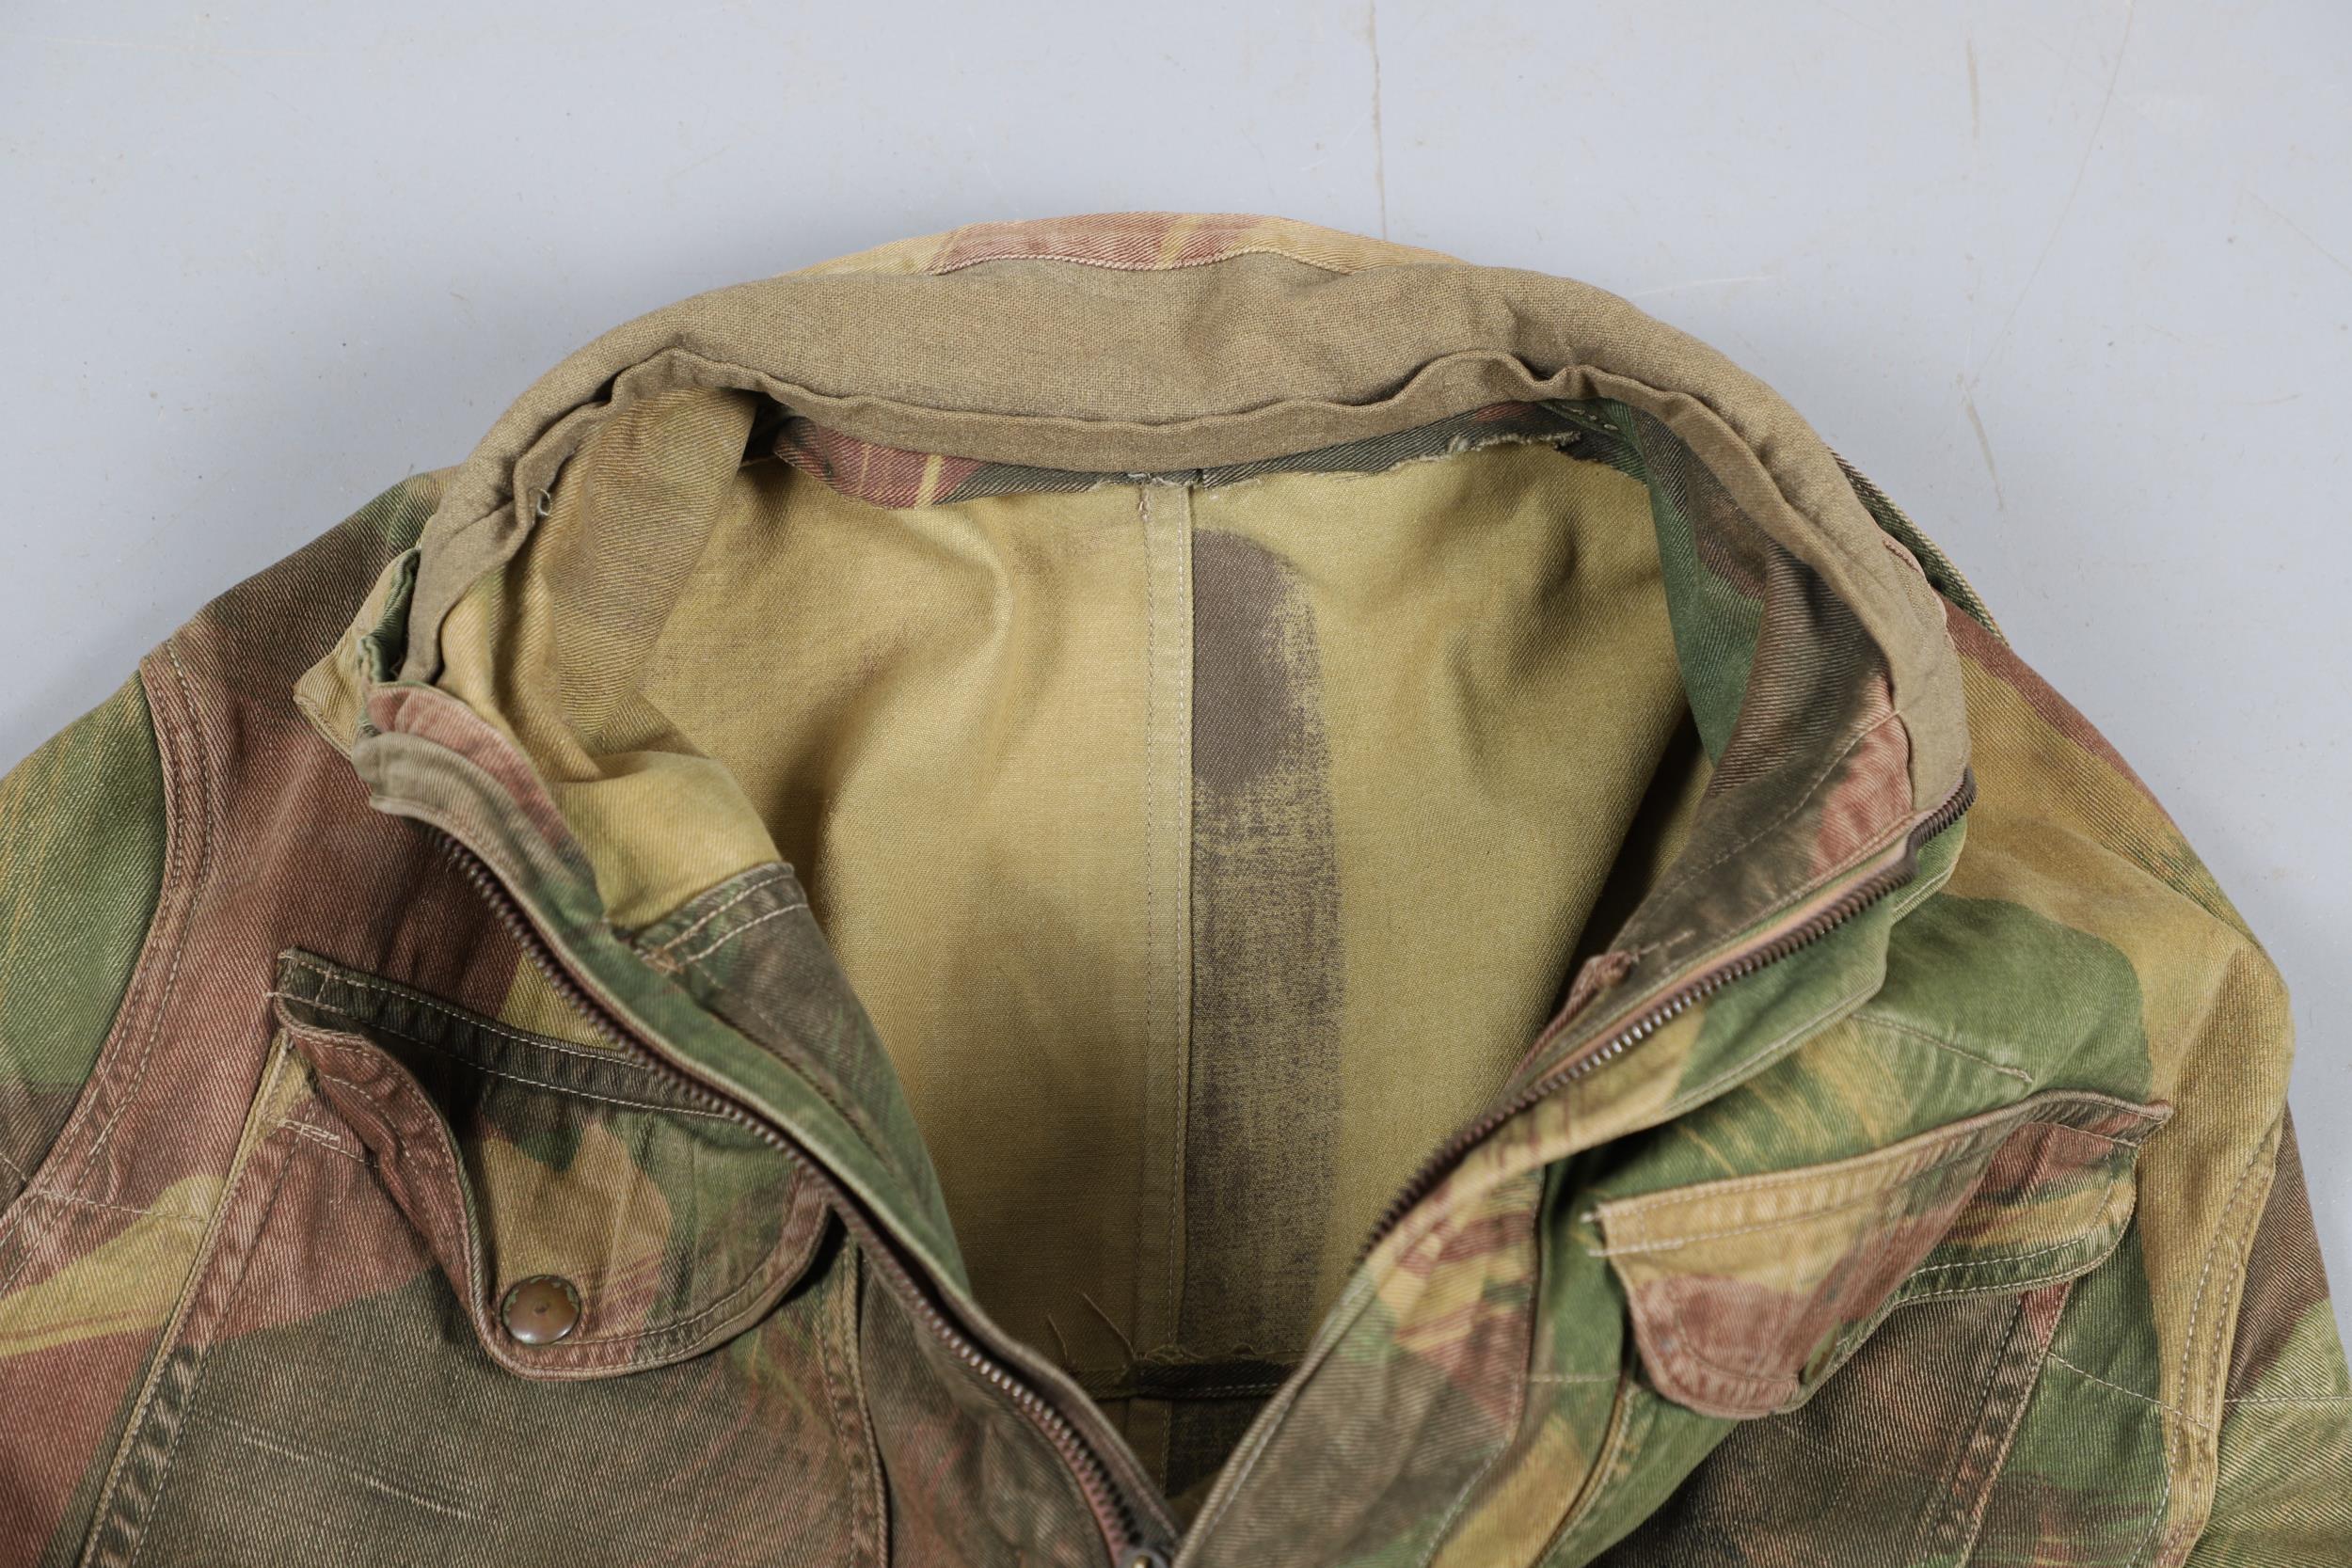 A DENISON SMOCK, SIZE 4, DATED 1956. - Image 14 of 16